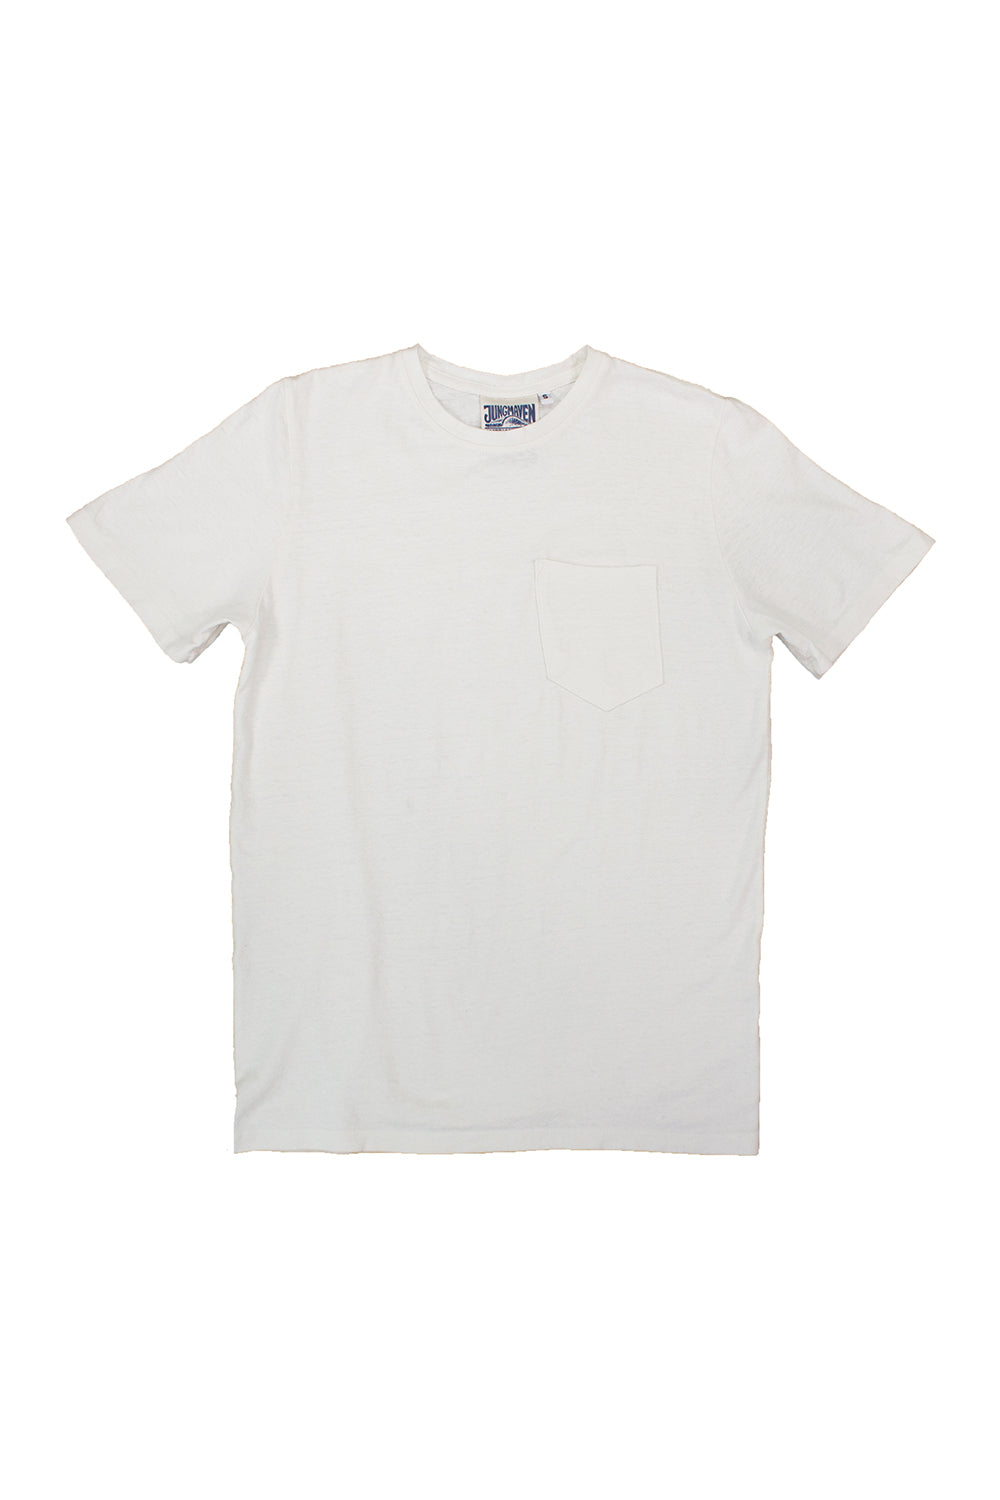 Baja Pocket Tee | Jungmaven Hemp Clothing & Accessories / Color: Washed White